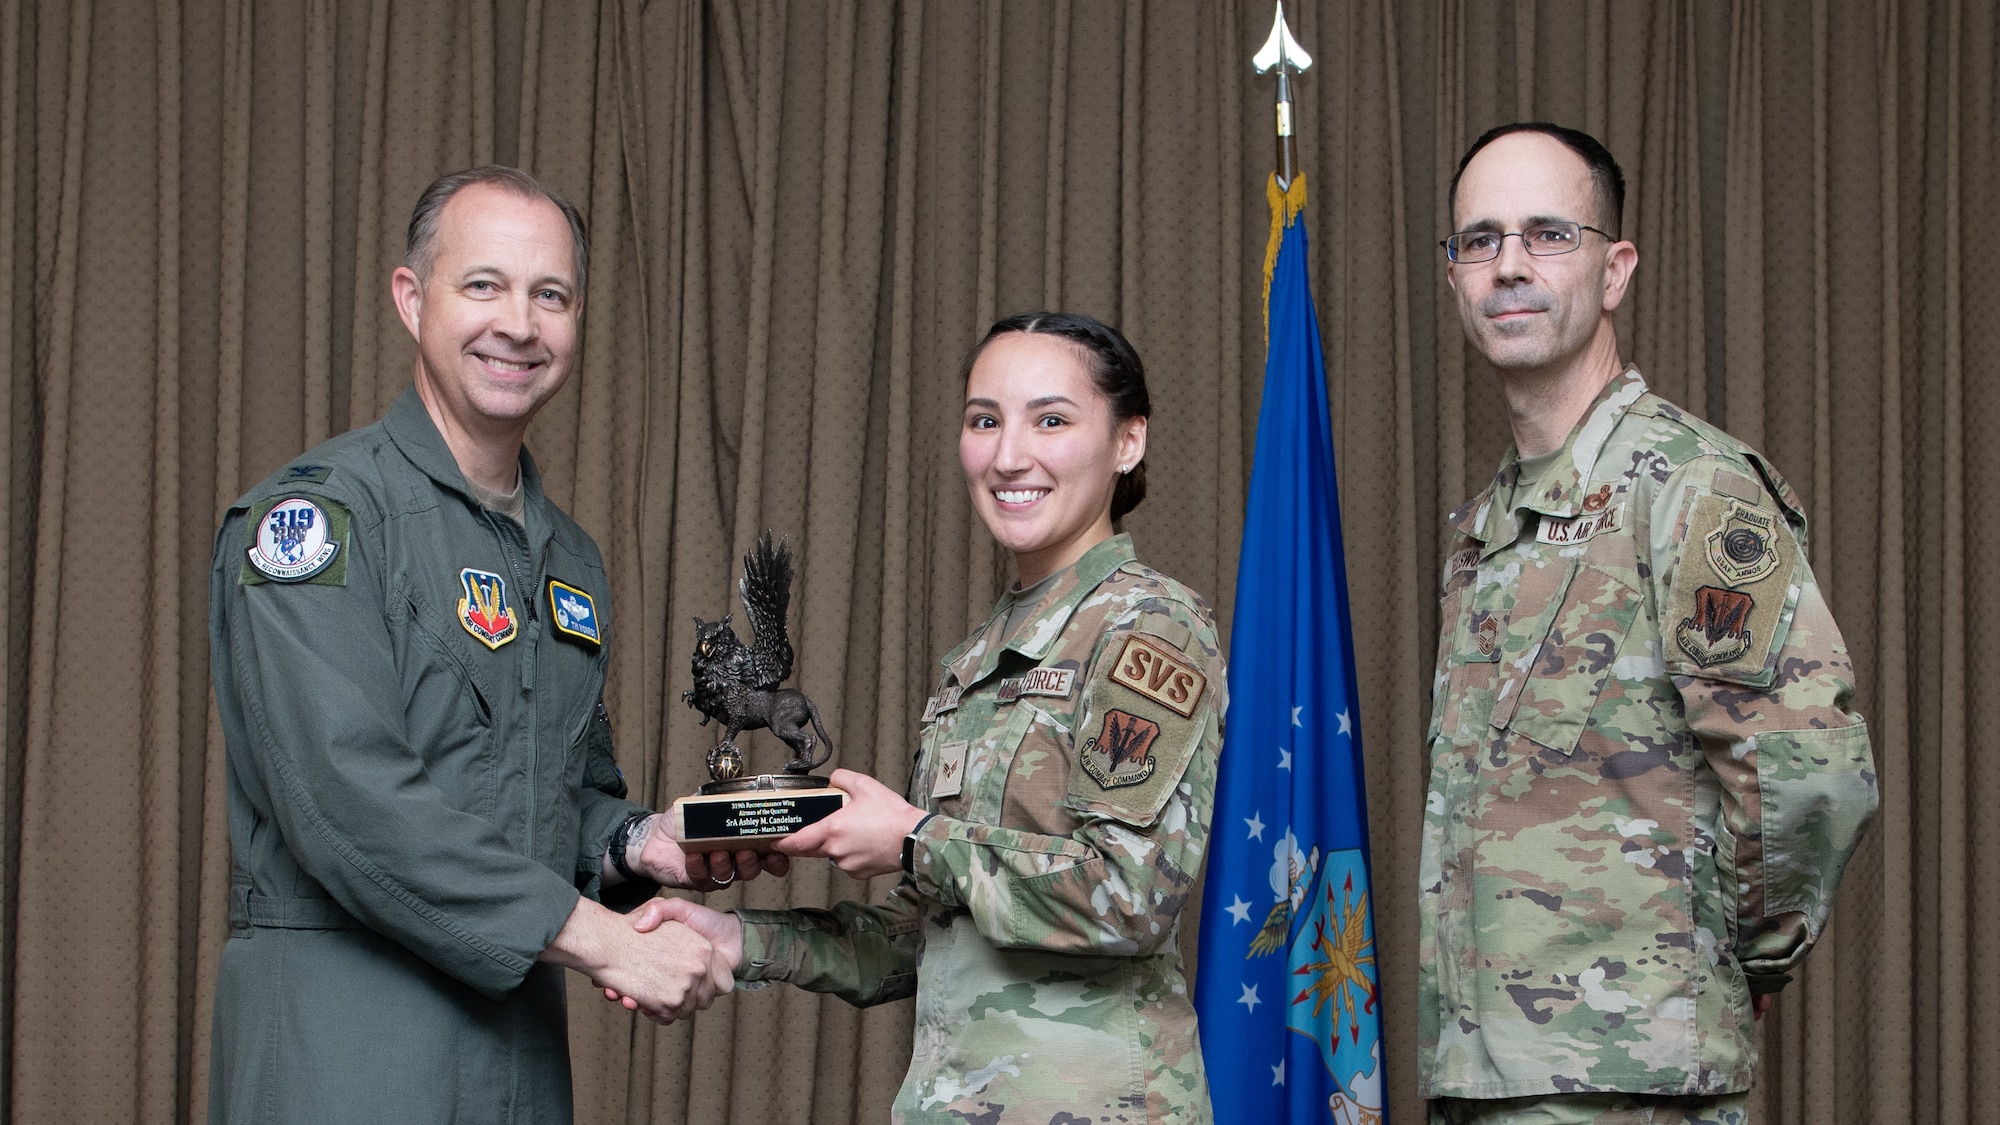 Two men and one woman  in military uniforms stand on stage exchanging an award.